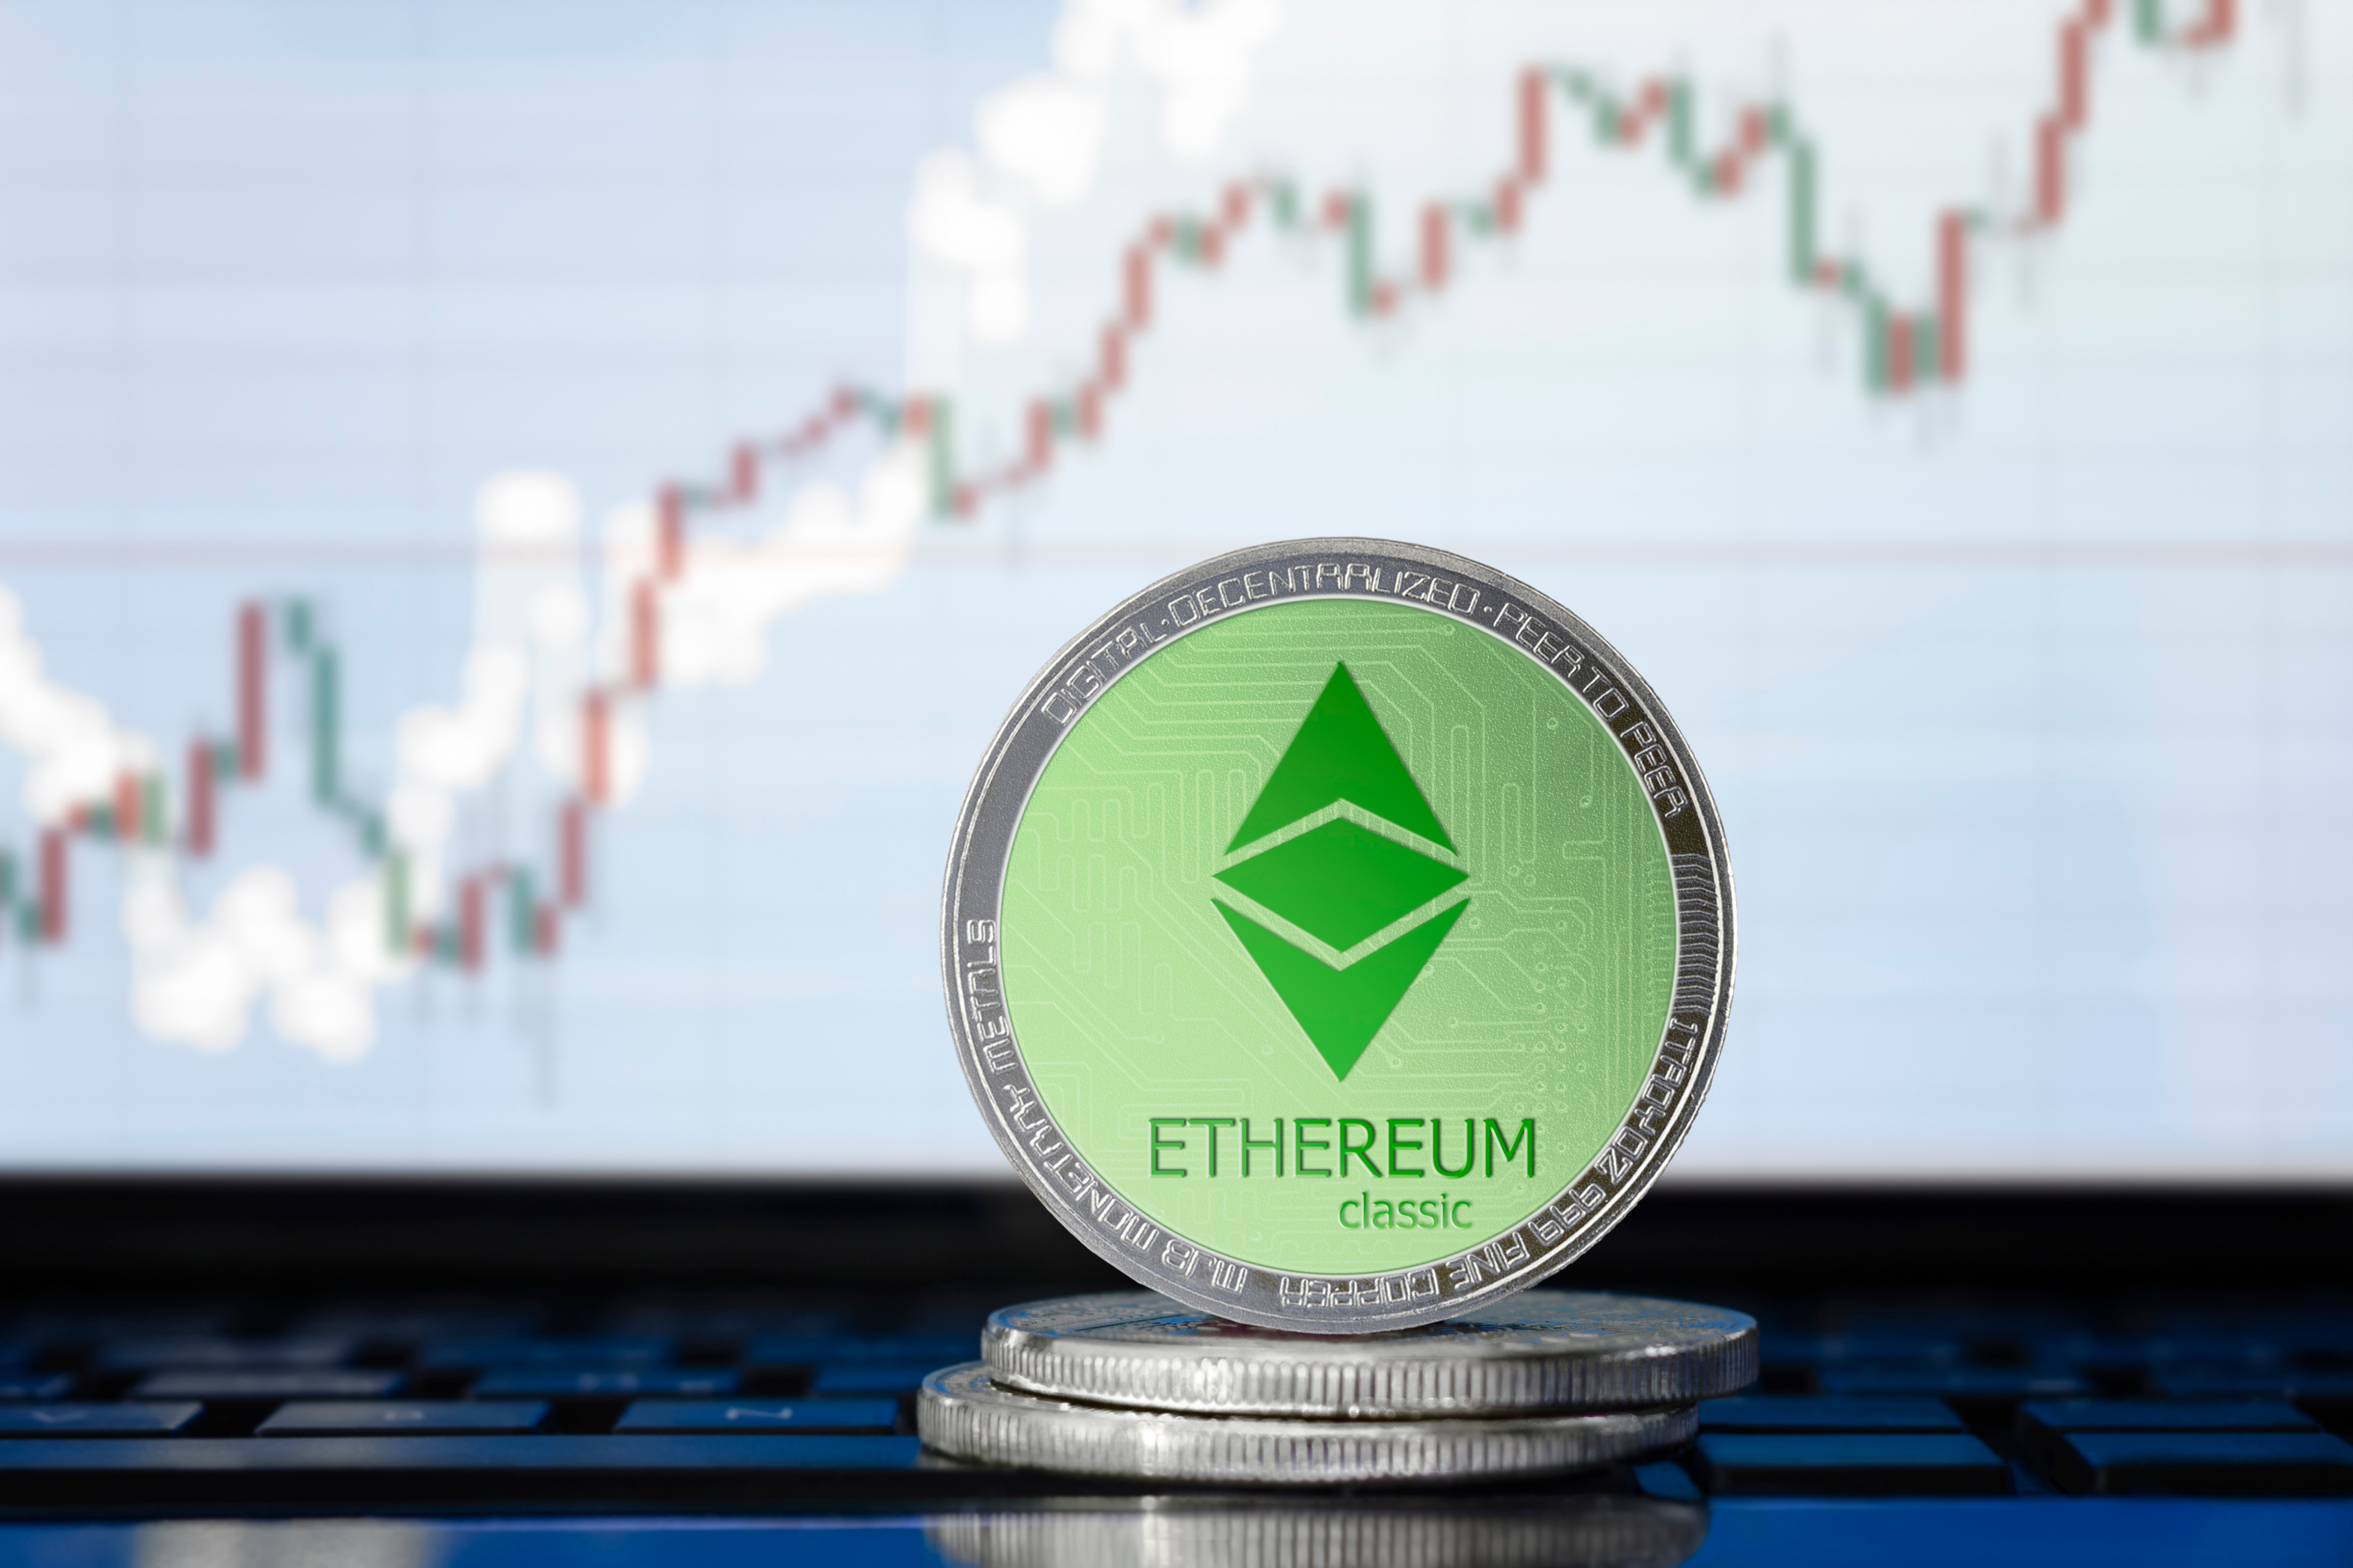 Ethereum Classic (ETC) Shoots Up 26% To Emerge As Day&#39;s Top Gainer Ahead Of Bitcoin, Ethereum, Dogecoin: Here&#39;s Why